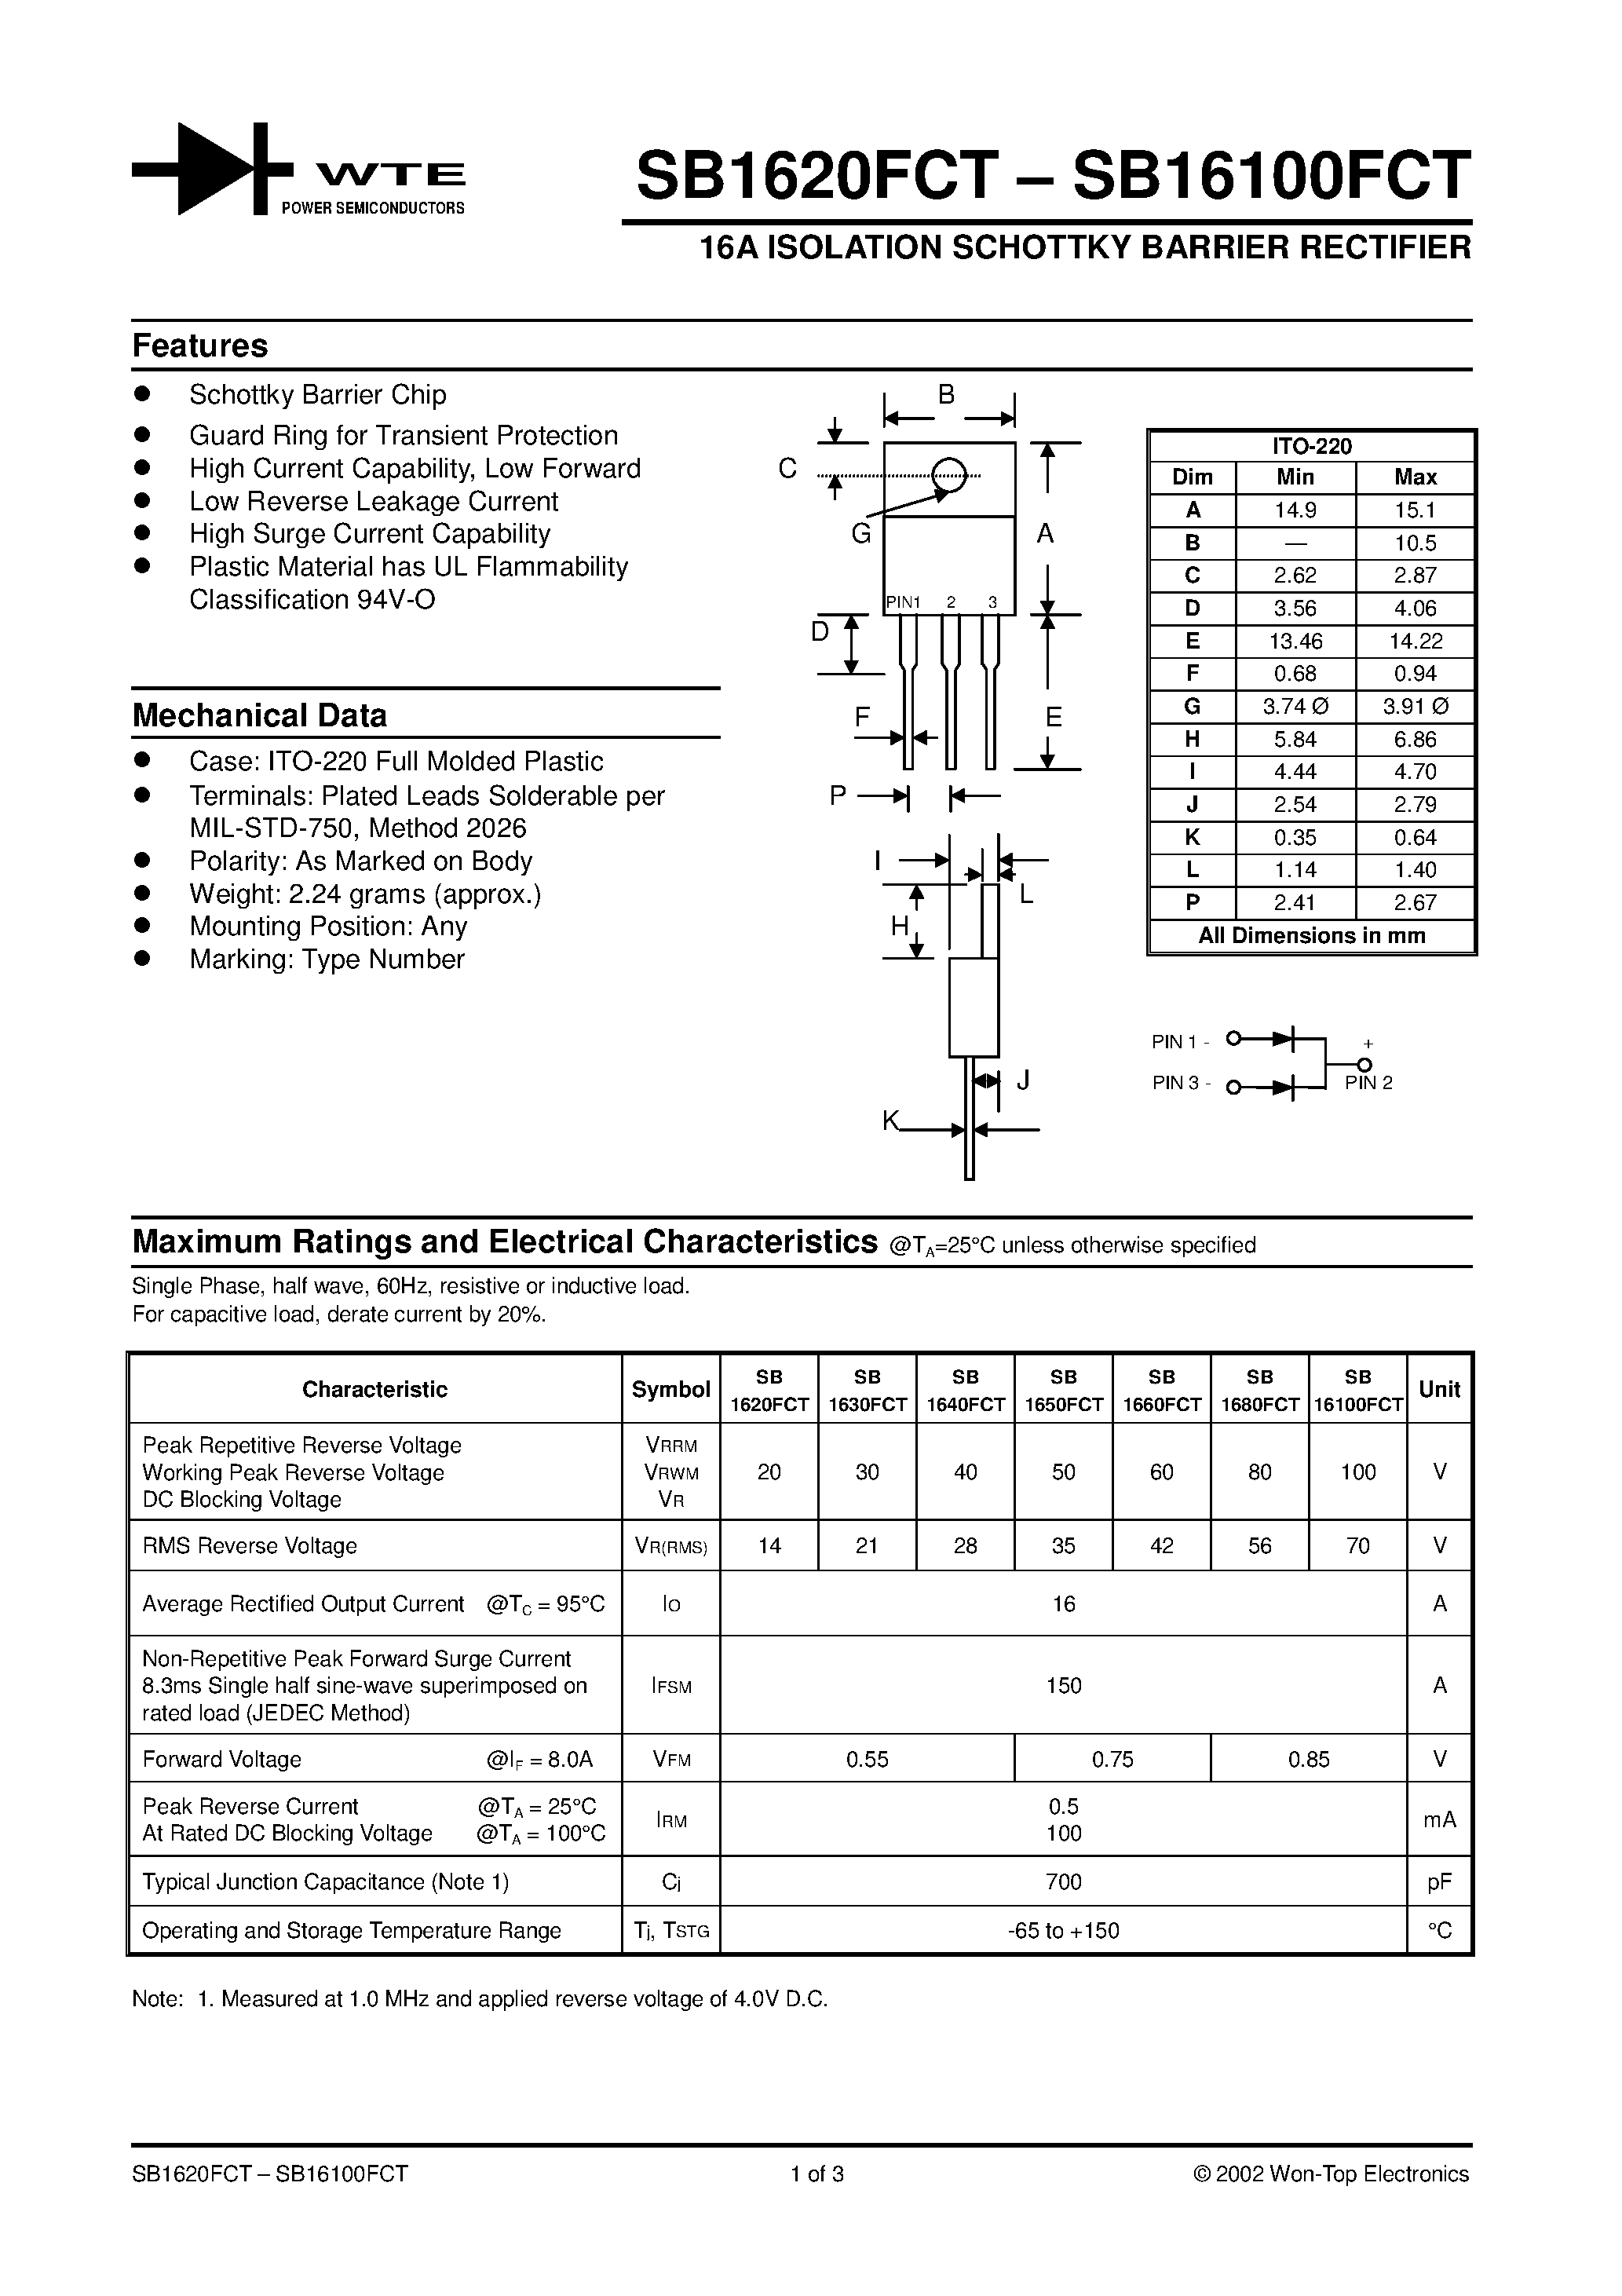 Datasheet SB1640FCT - 16A ISOLATION SCHOTTKY BARRIER RECTIFIER page 1